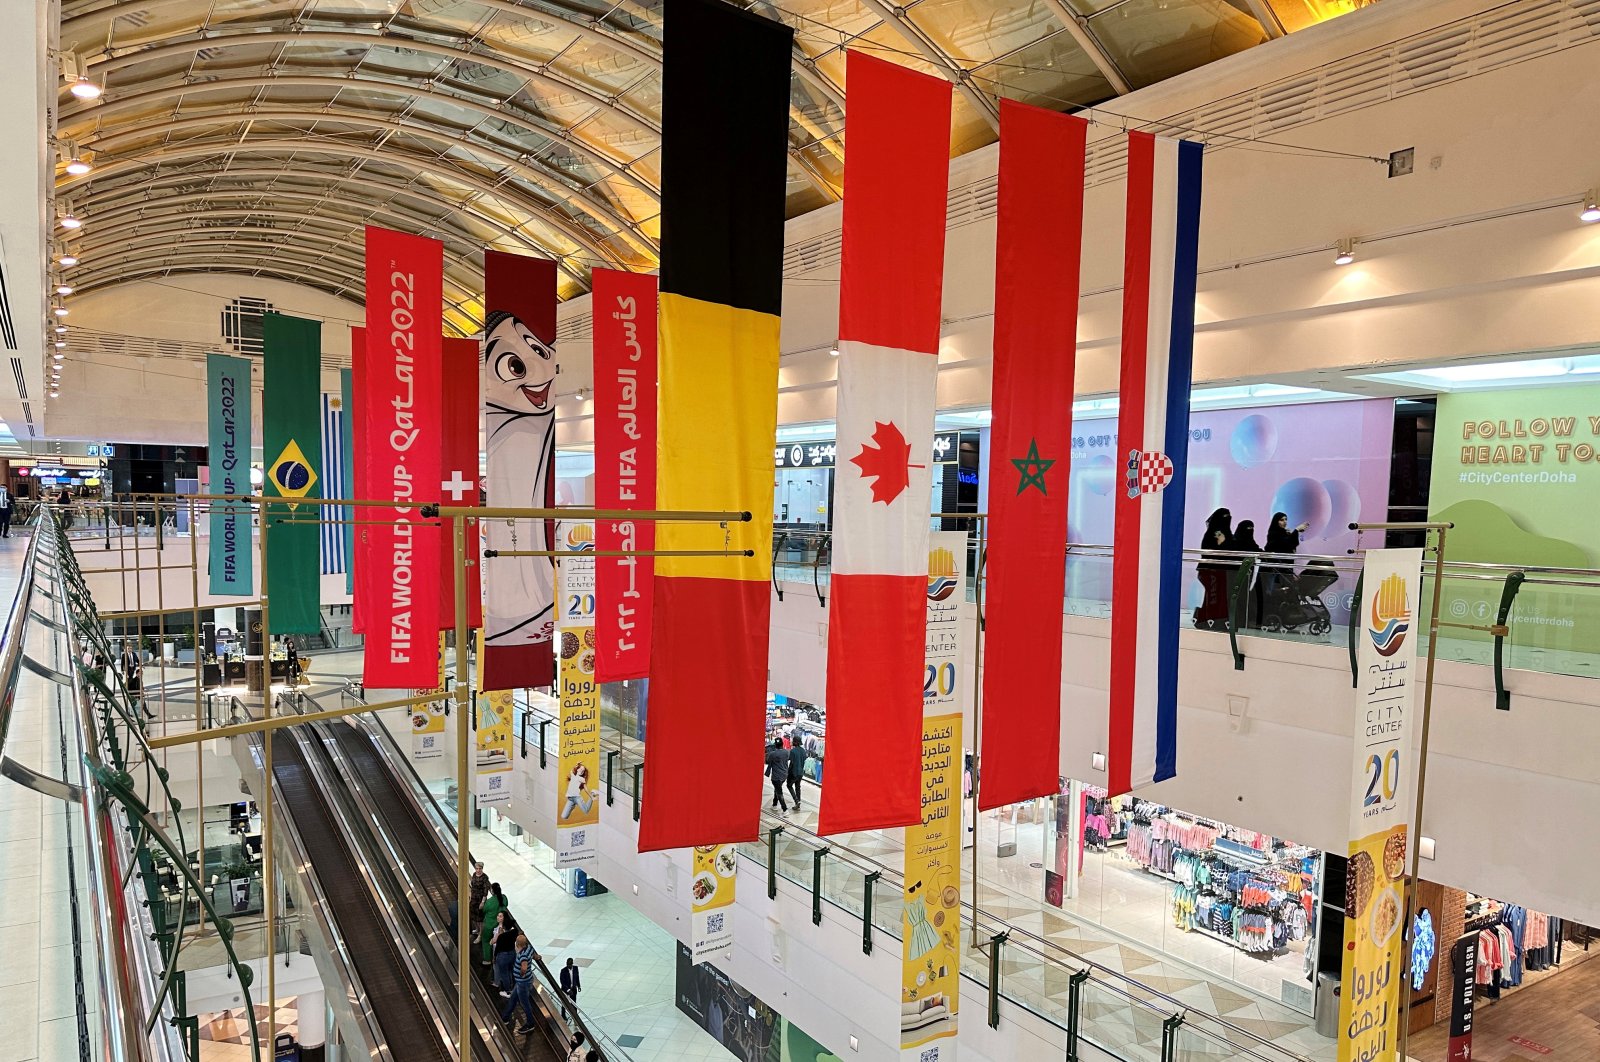 Flags of countries qualified for the Qatar World Cup 2022 are seen at a shopping mall in Doha, Oct. 19, 2022. (Reuters Photo)